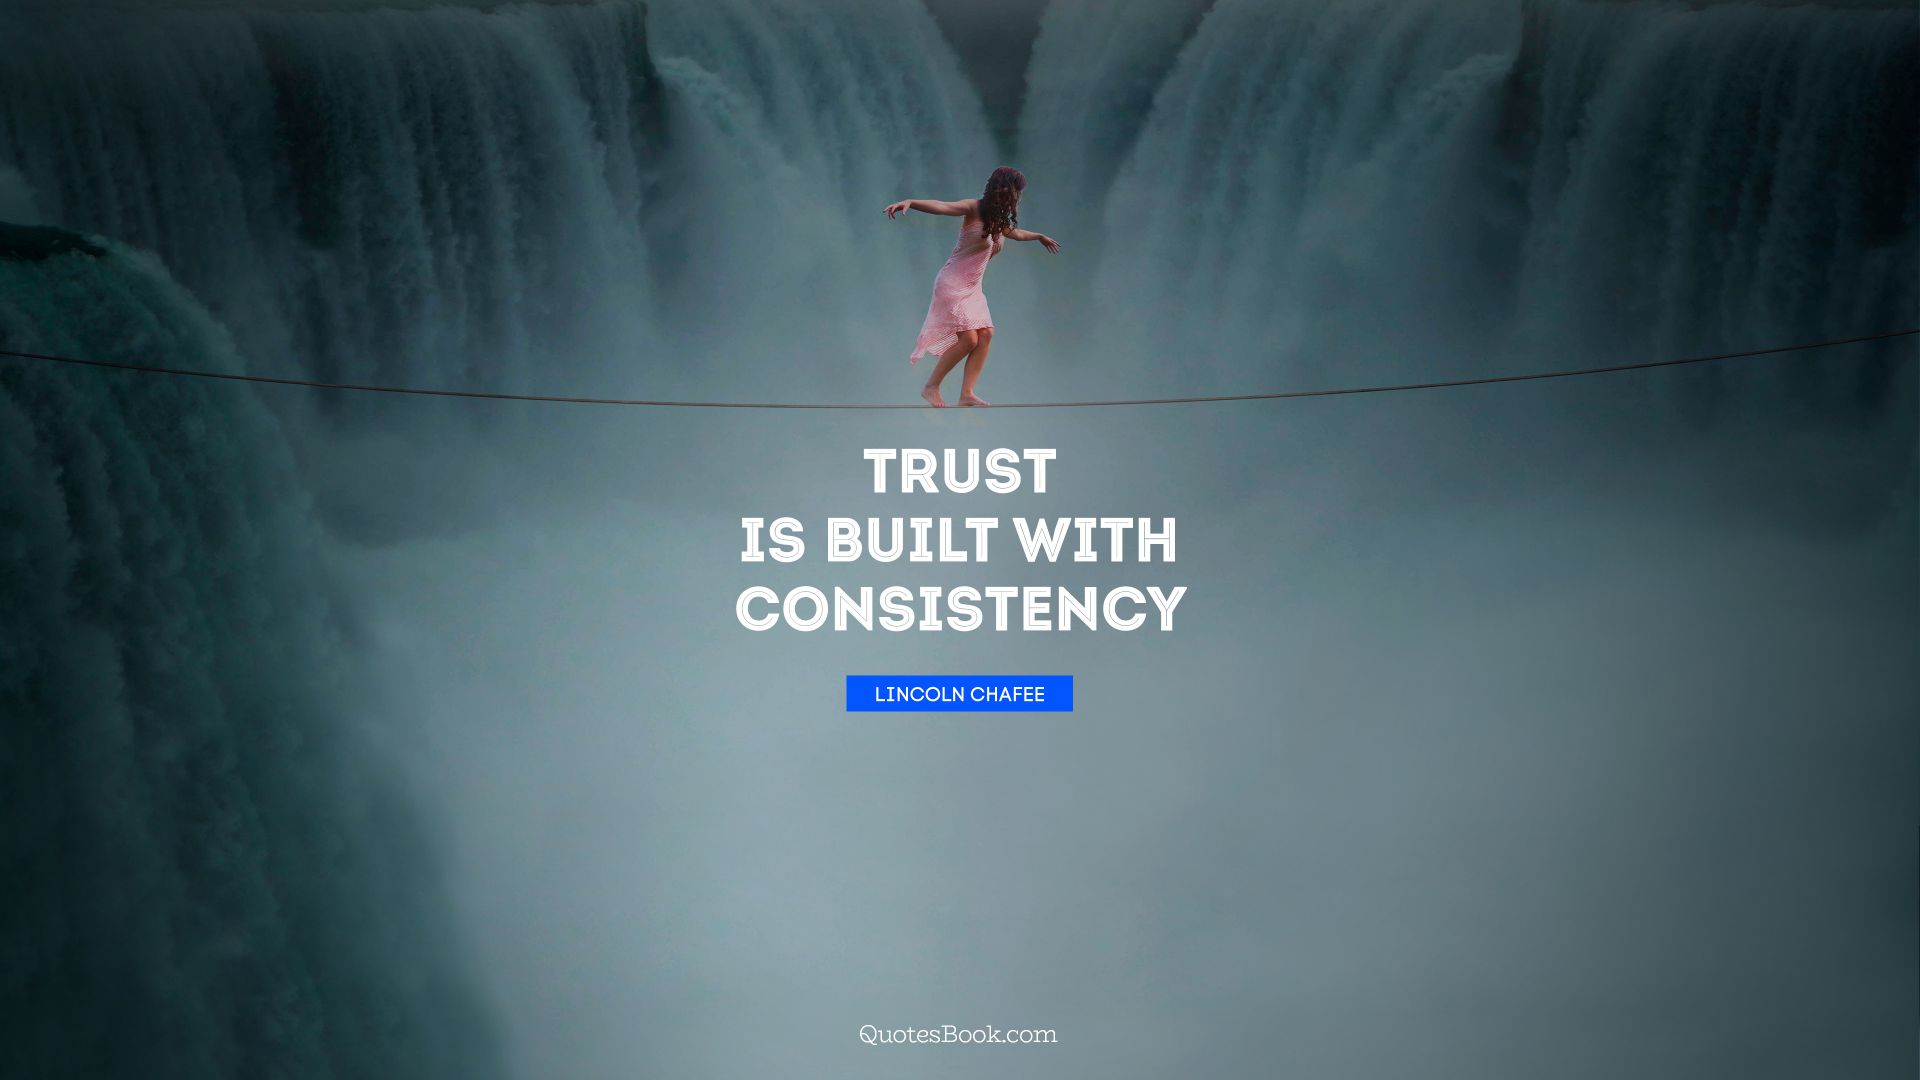 Trust is built with consistency. - Quote by Lincoln Chafee